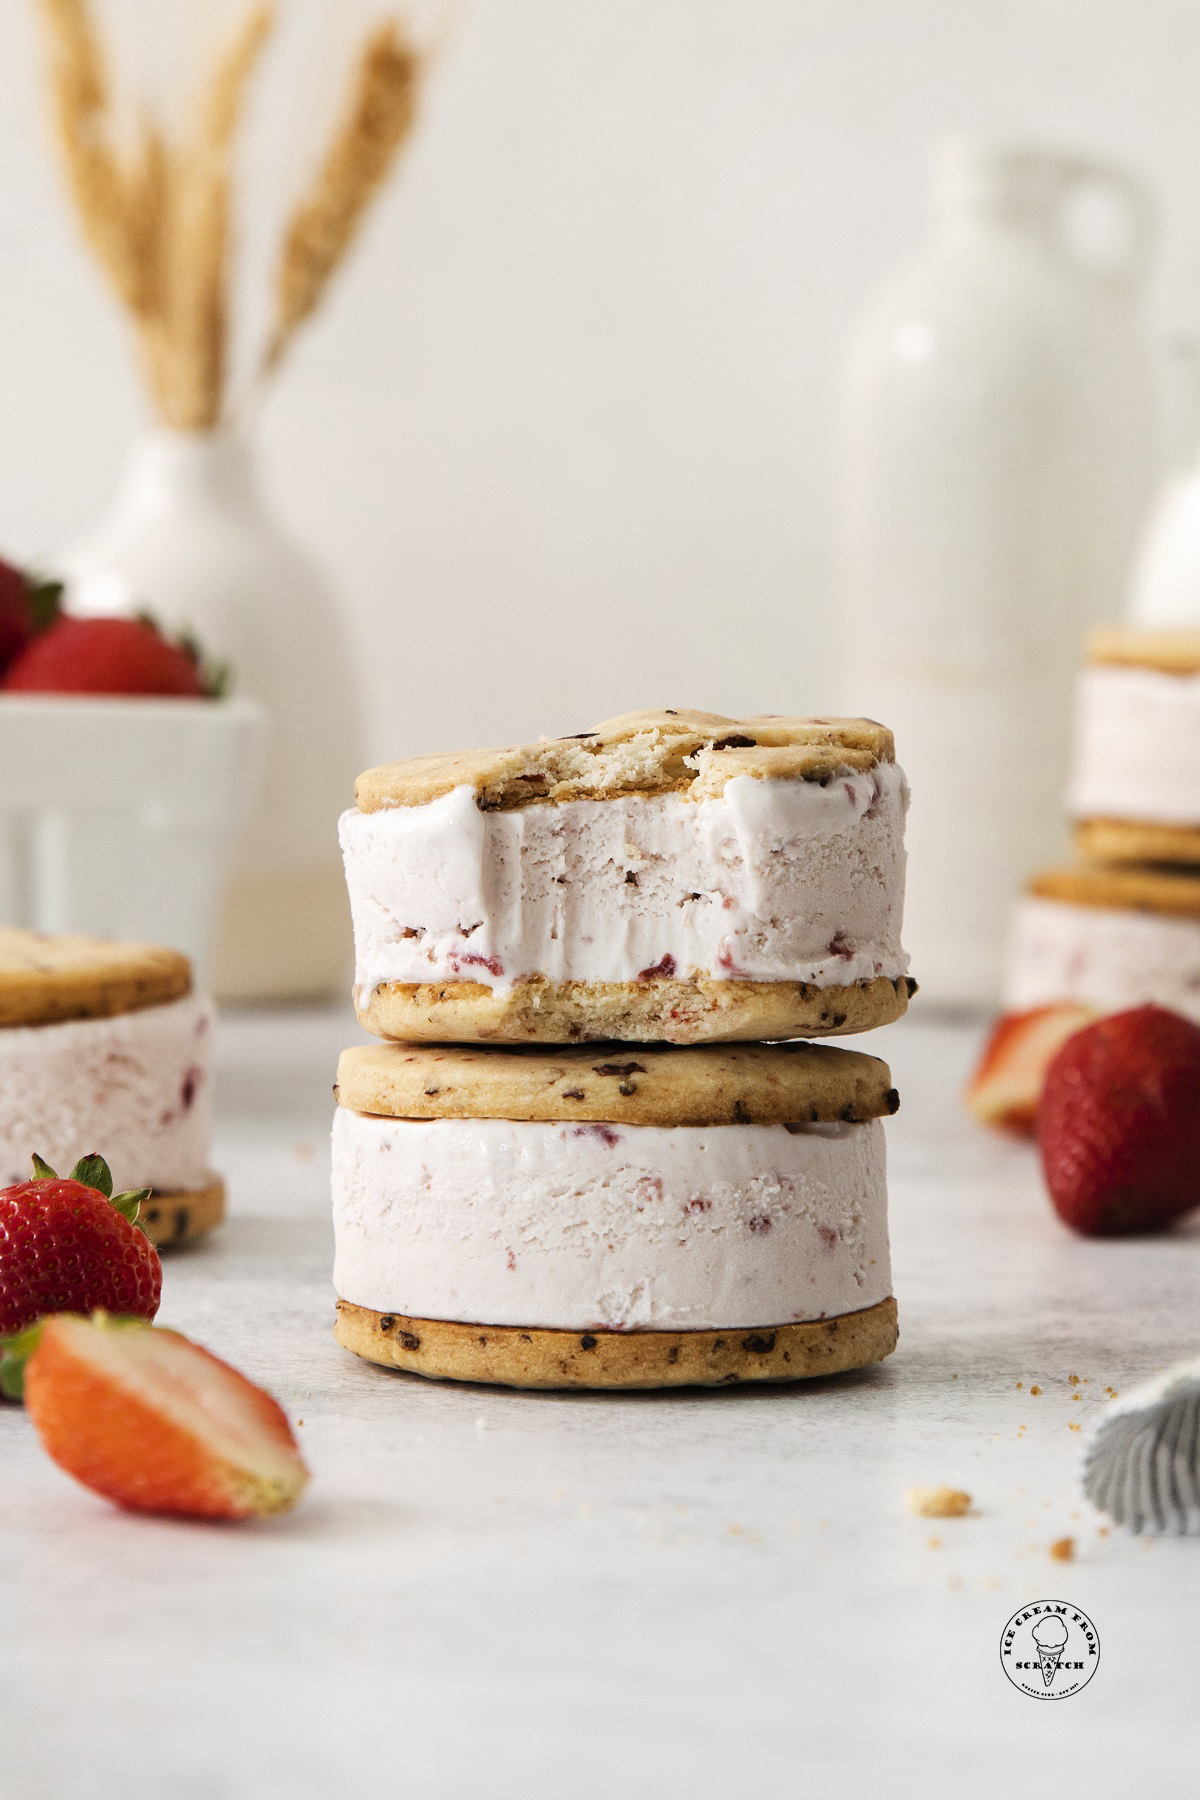 Two round cookie strawberry ice cream sandwiches on top of each other. The top one has a bite taken.